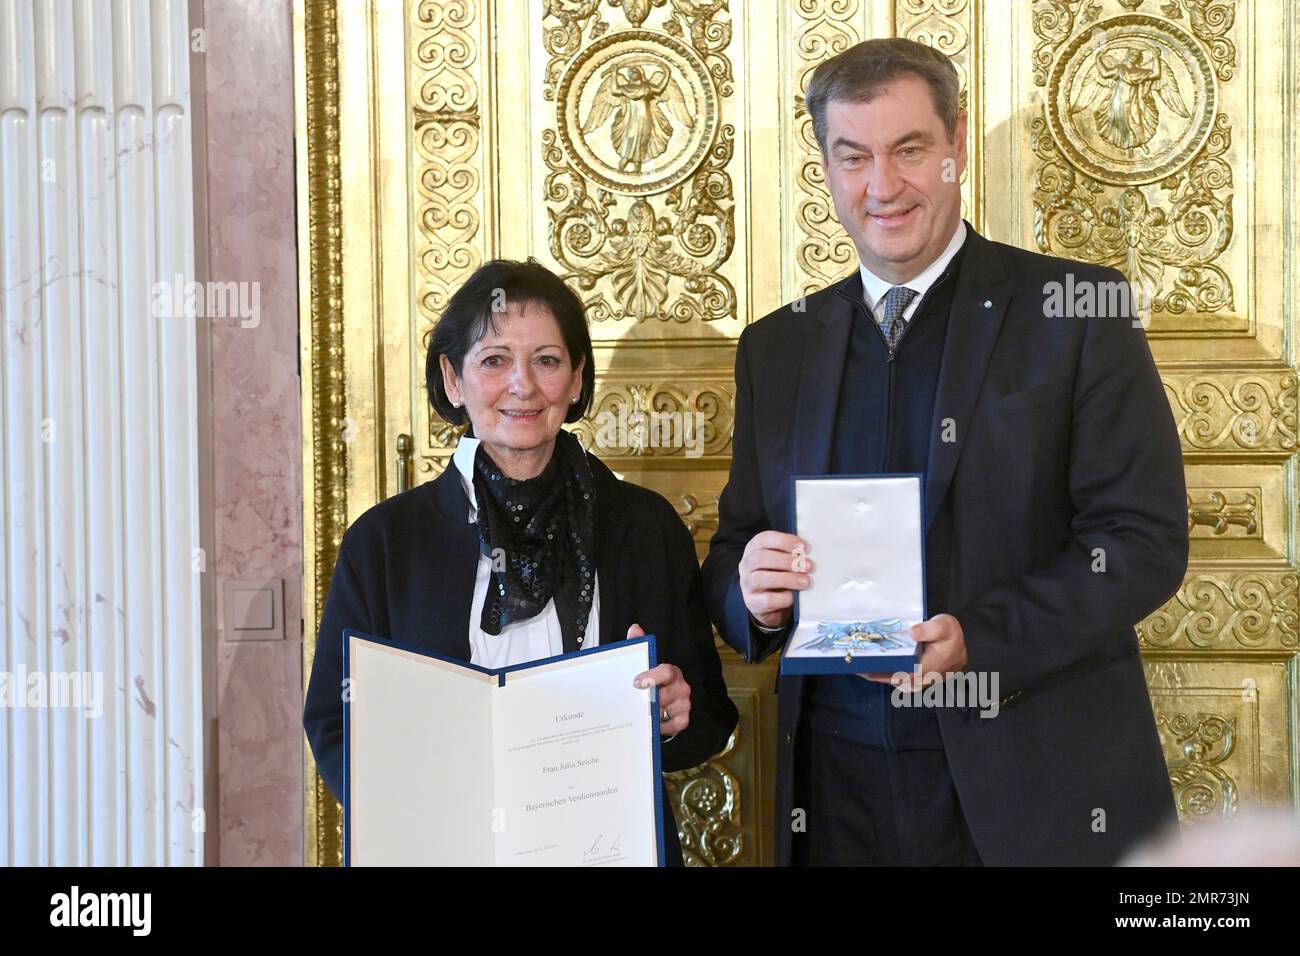 Julia SEICHE with Markus SOEDER (Prime Minister of Bavaria and CSU Chairman). Awarding of the Bavarian Order of Merit in the Prince Carl Palais on January 31, 2023. ? Stock Photo